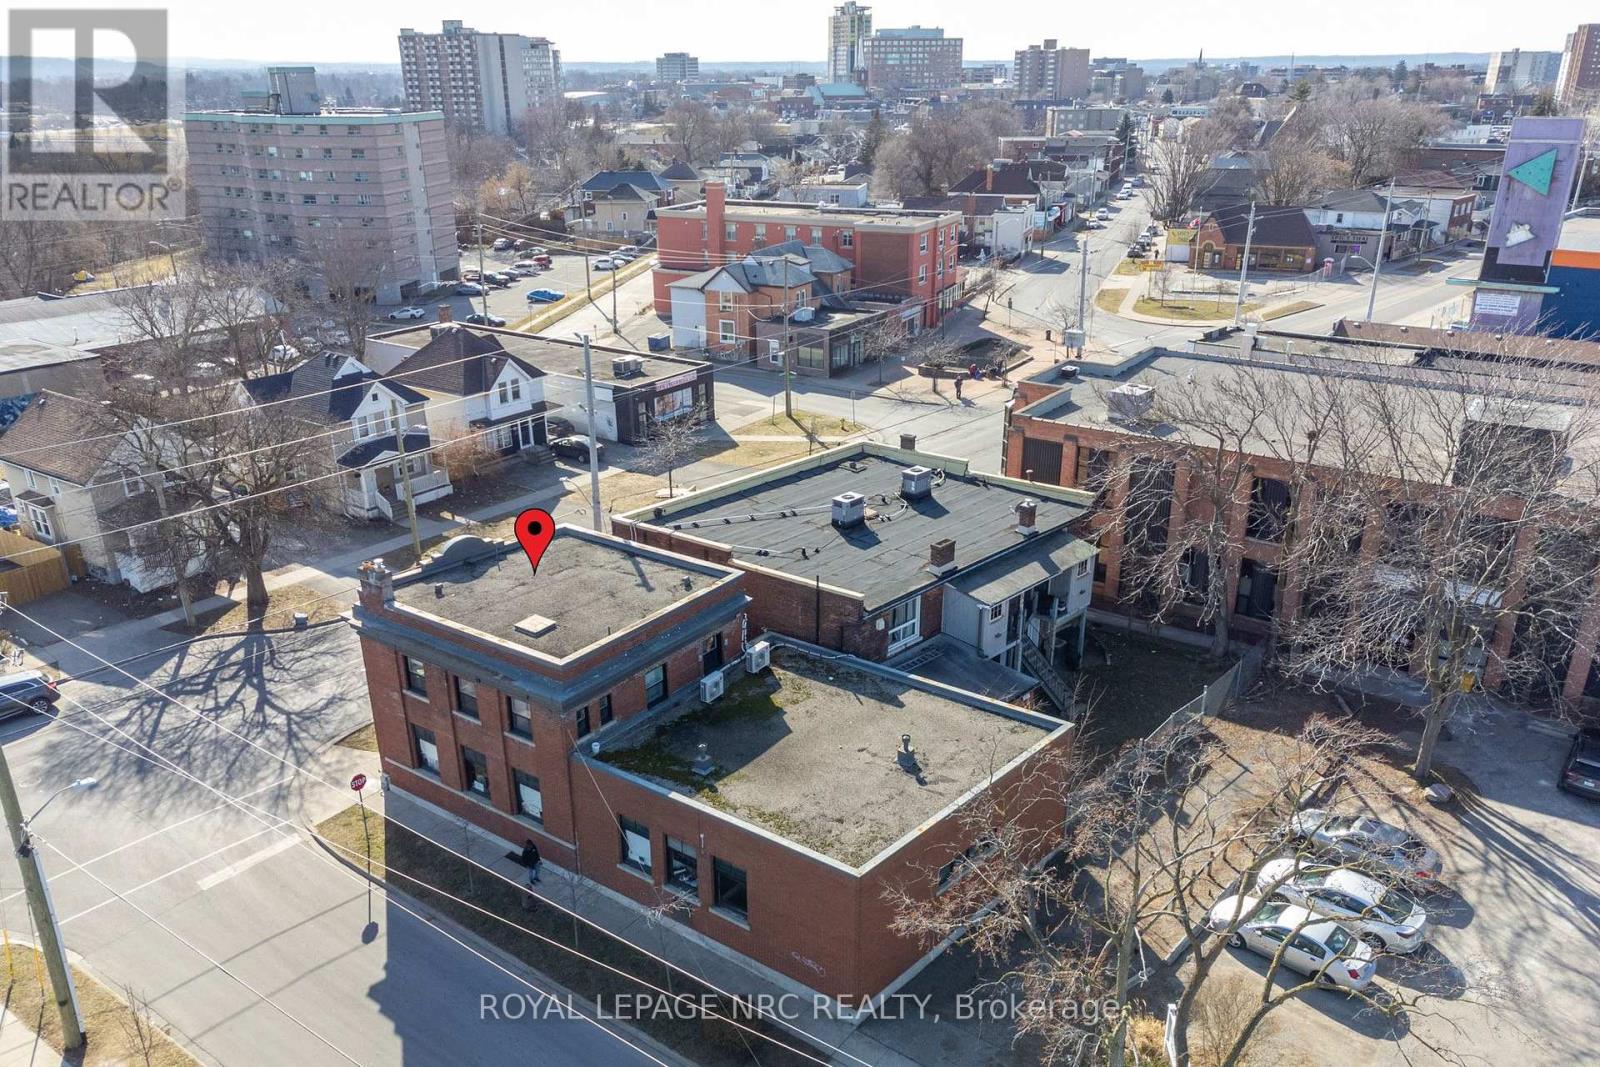 For sale: 255 LAKE Street, St. Catharines, Ontario L2R5Z5 - 40555199